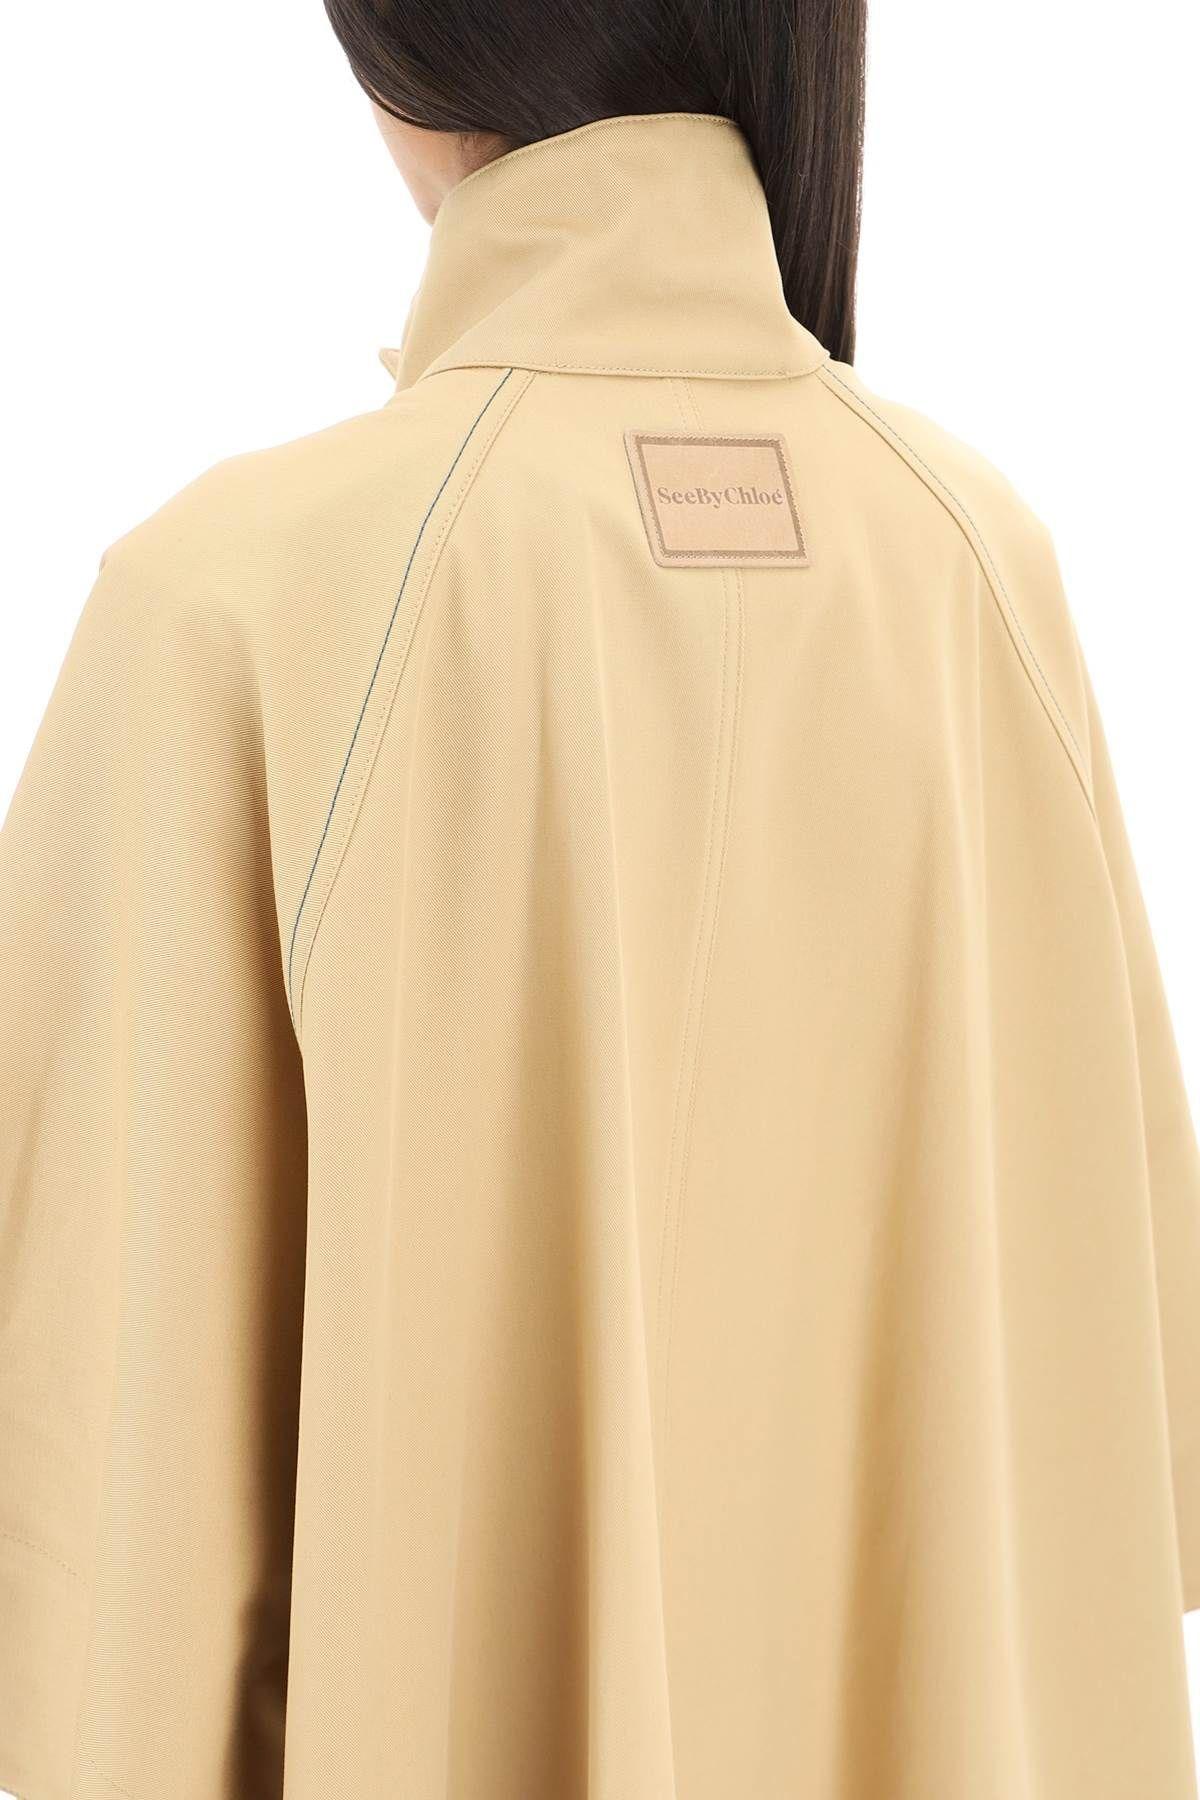 SEE BY CHLOÉ ORGANIC COTTON CAPE